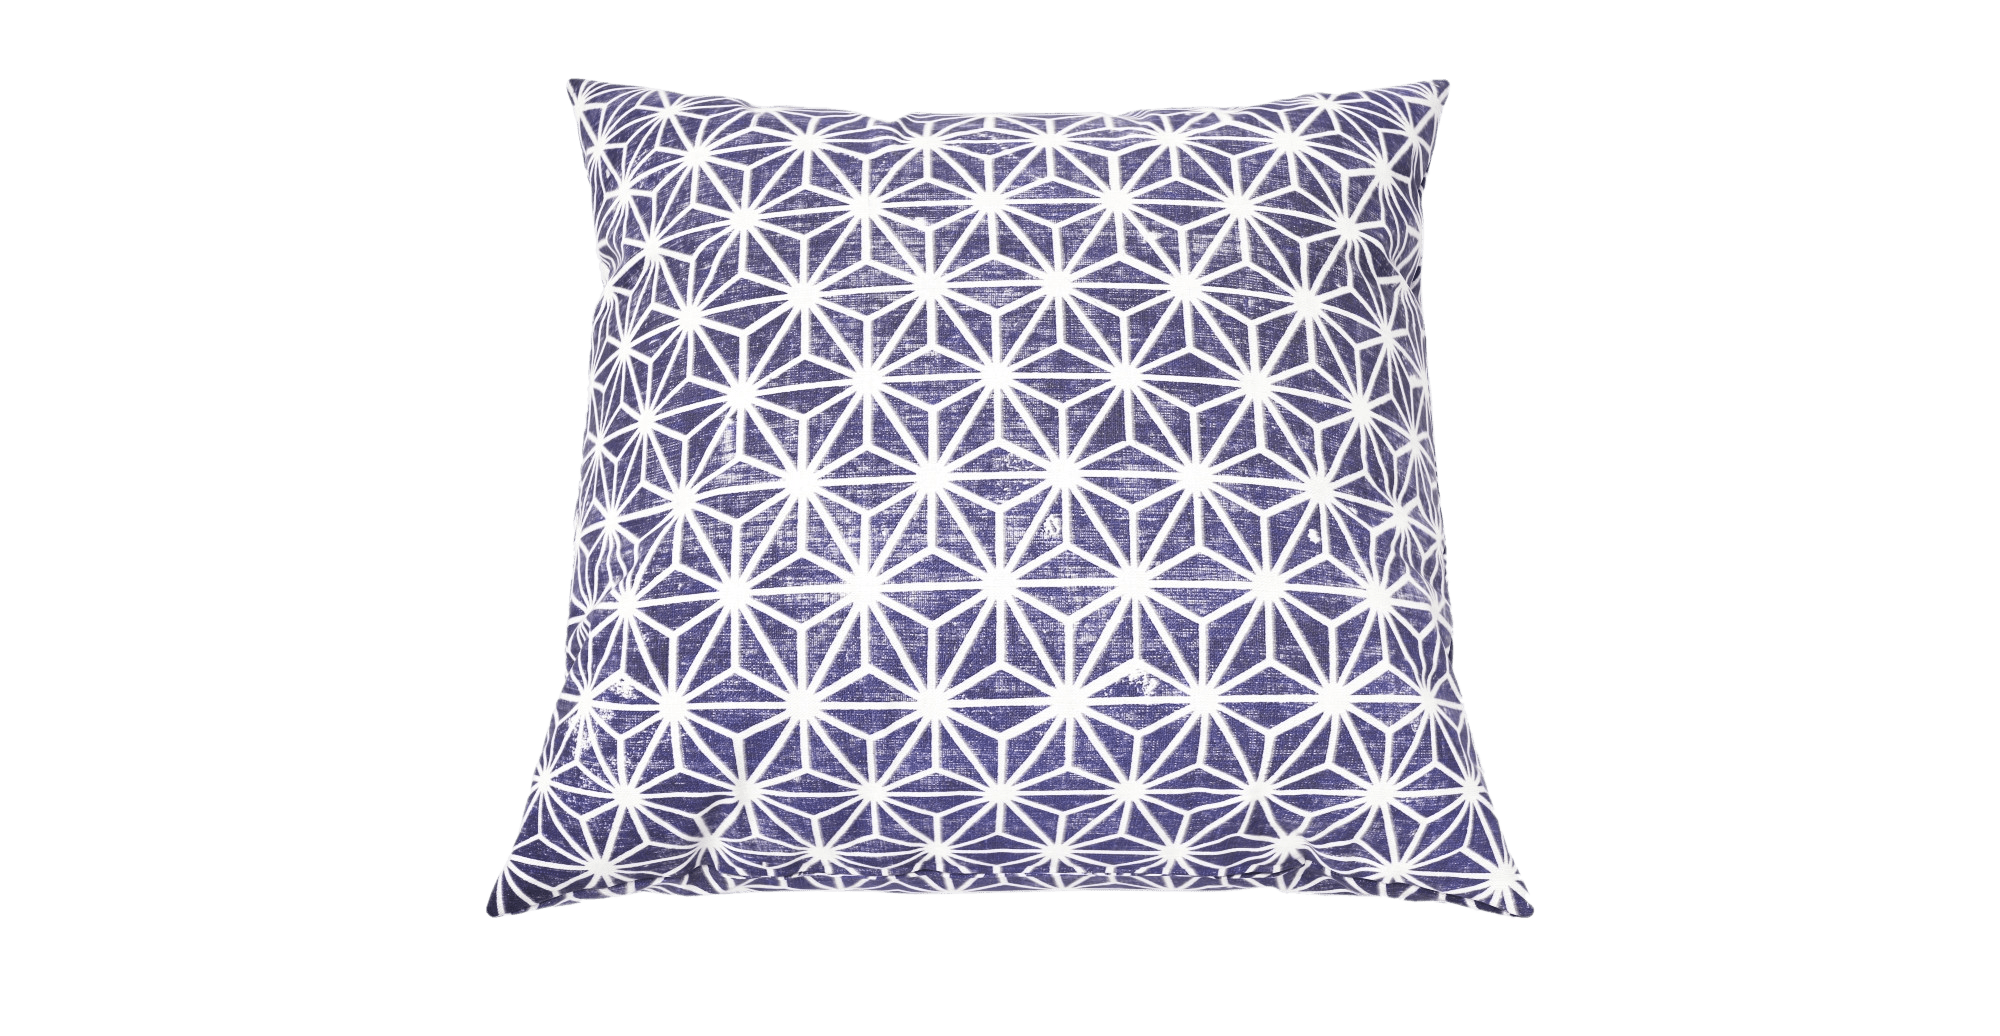 Cushion Picture Free Clipart HQ PNG Image